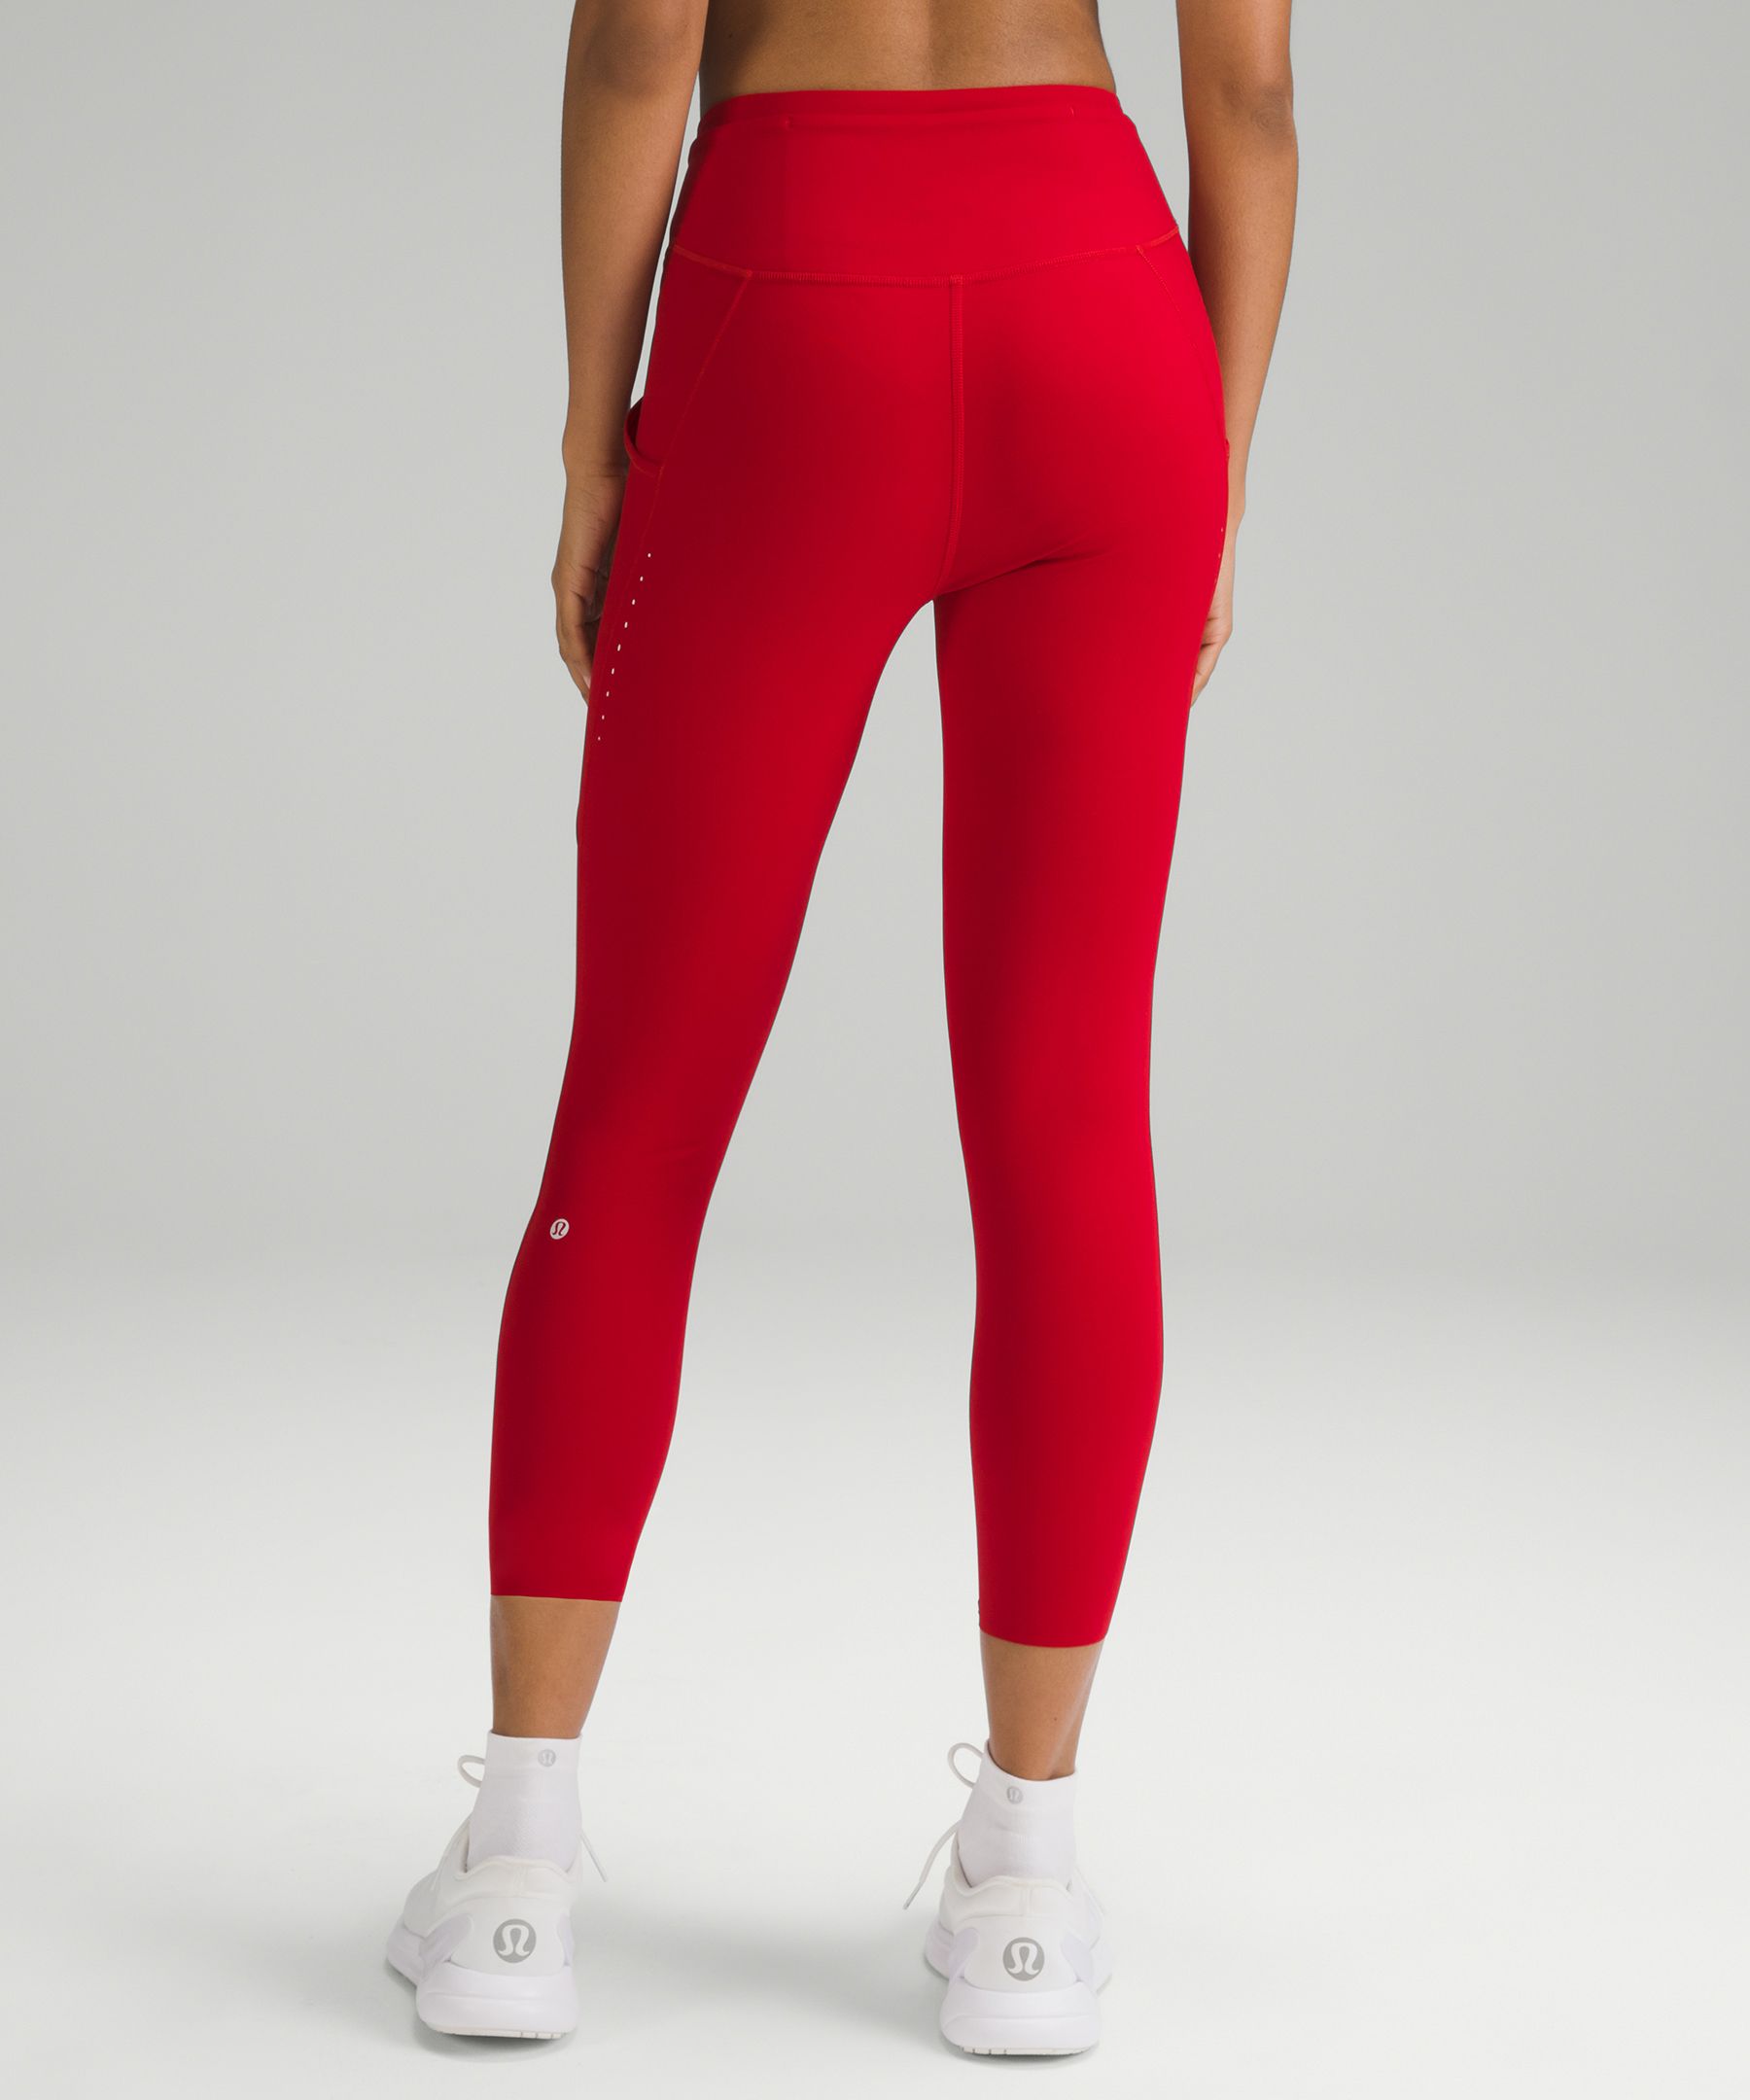 Fast and Free High-Rise Tight 25 *Pockets, Dark Red